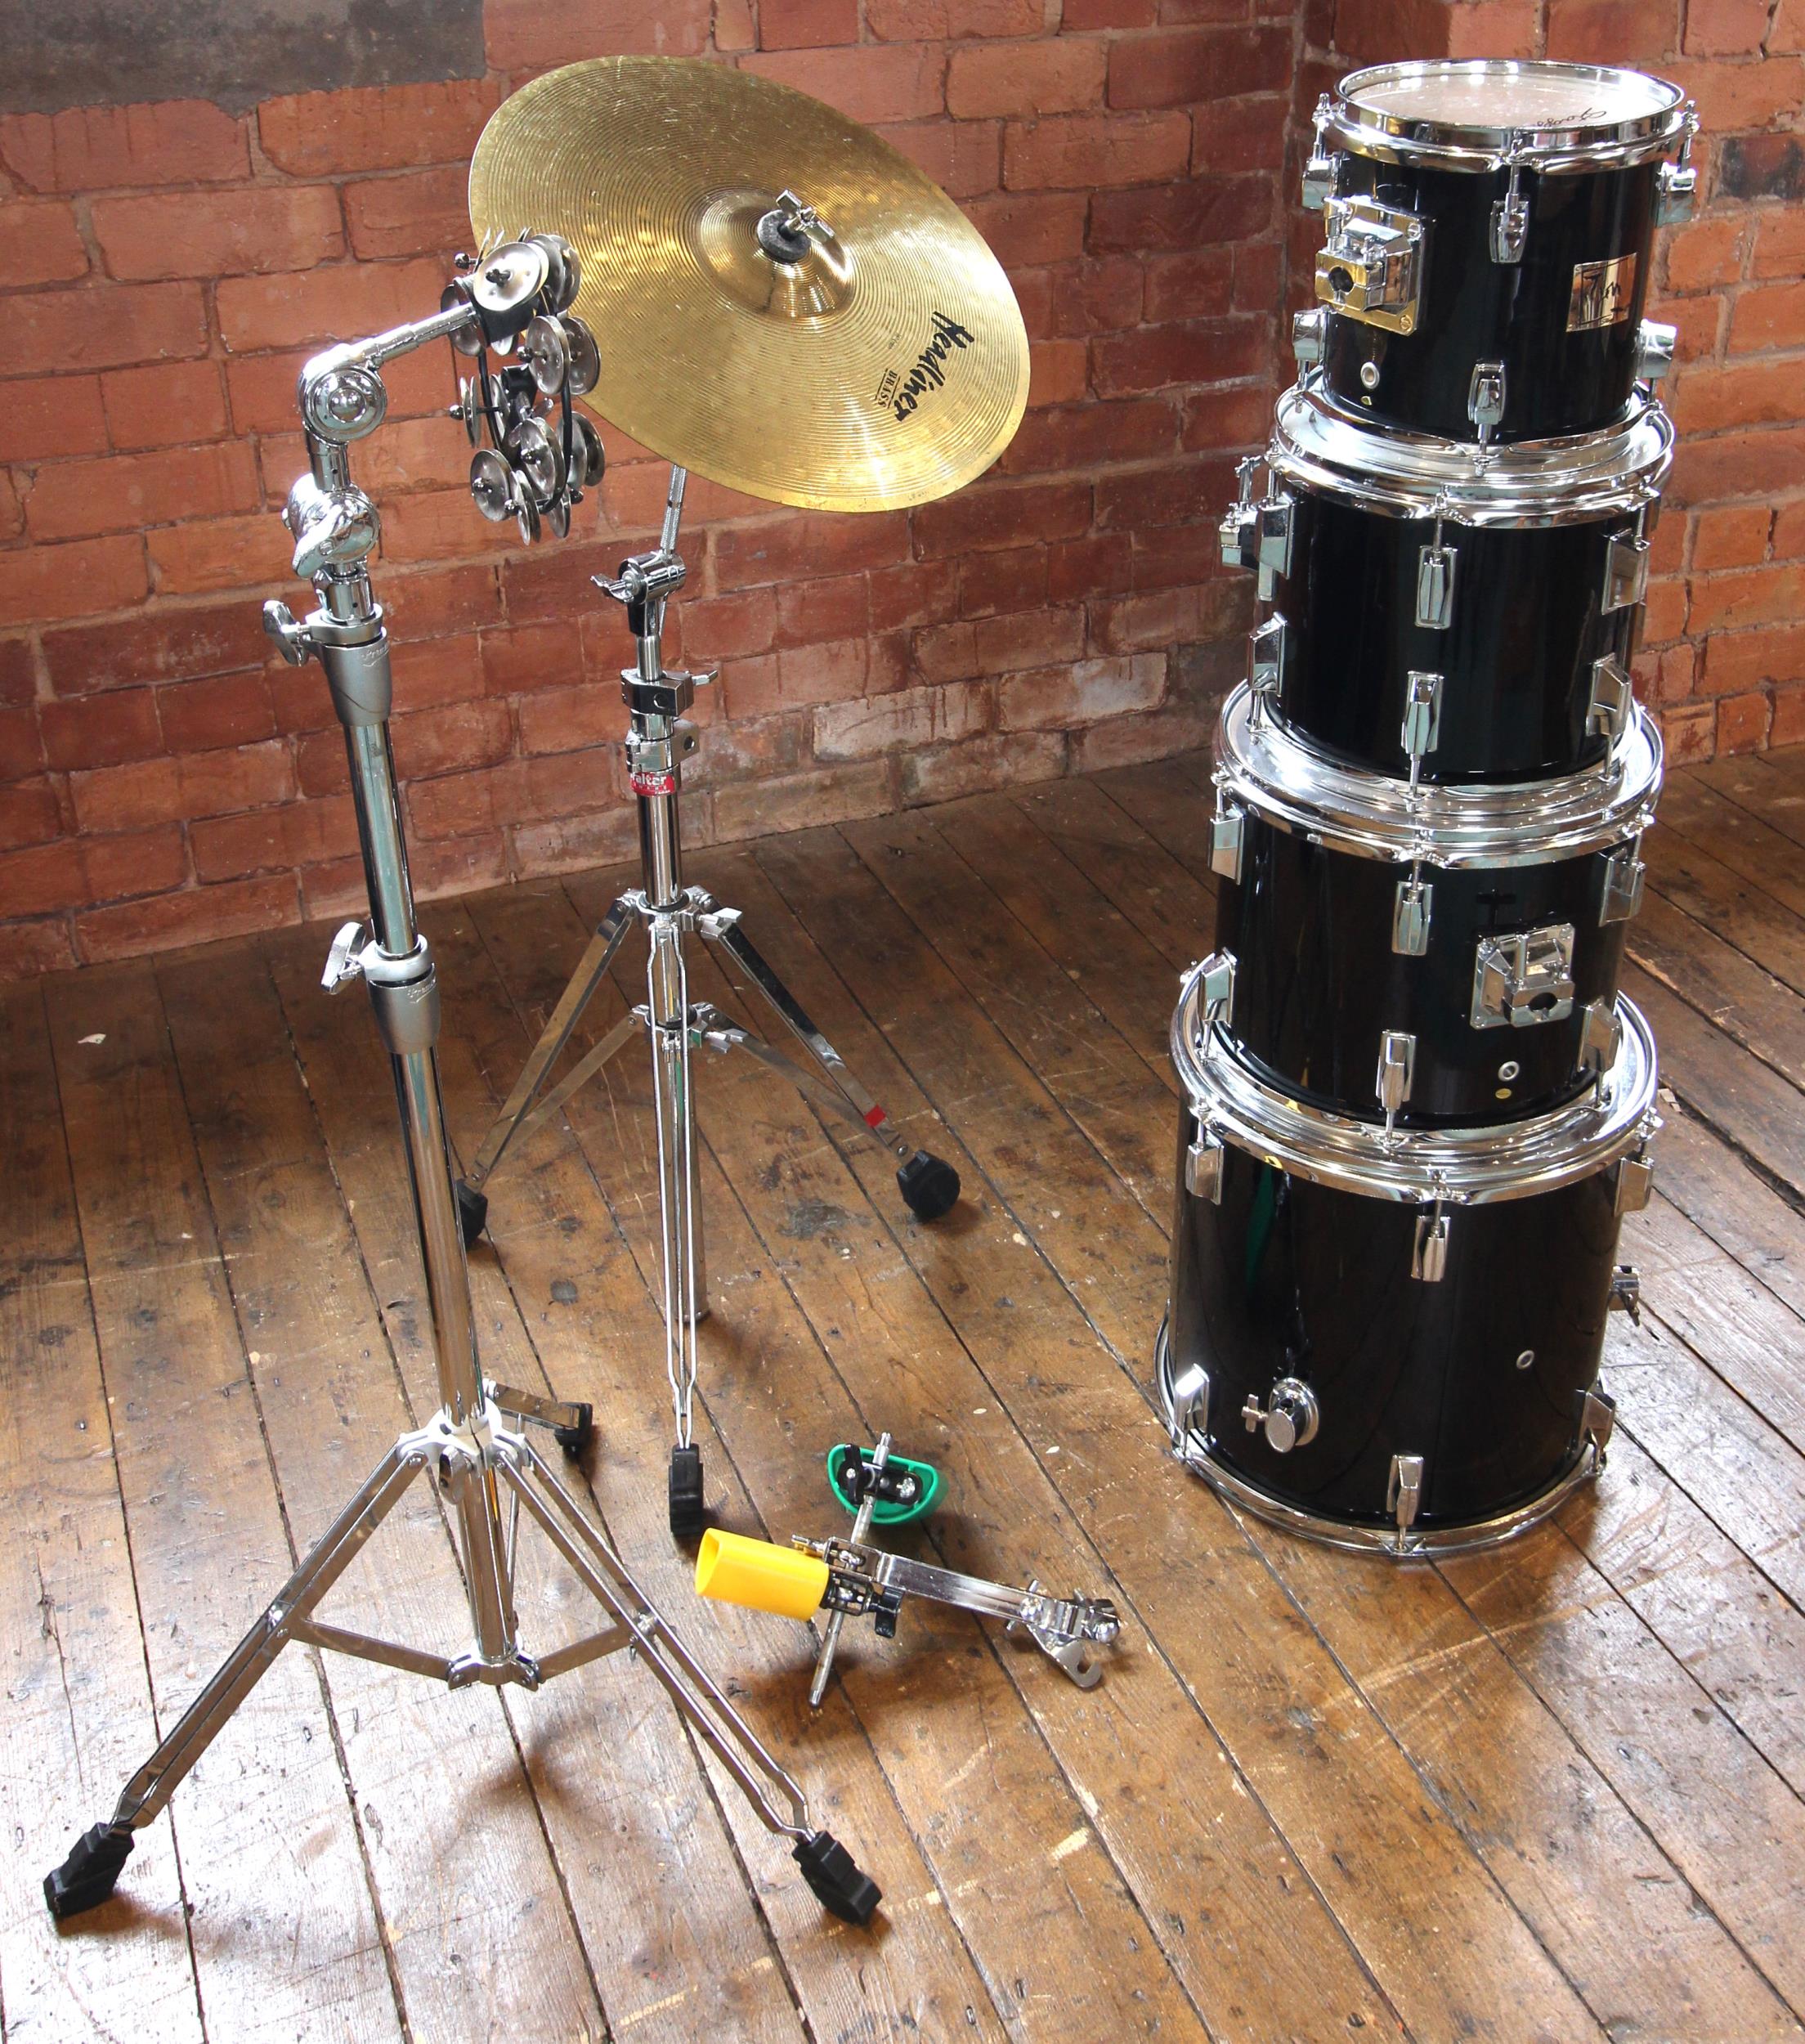 A Mapex Venus shell drum kit, including 22" bass drum, 16 " floor tom, snare, 8" 10" 12" toms, - Image 2 of 3